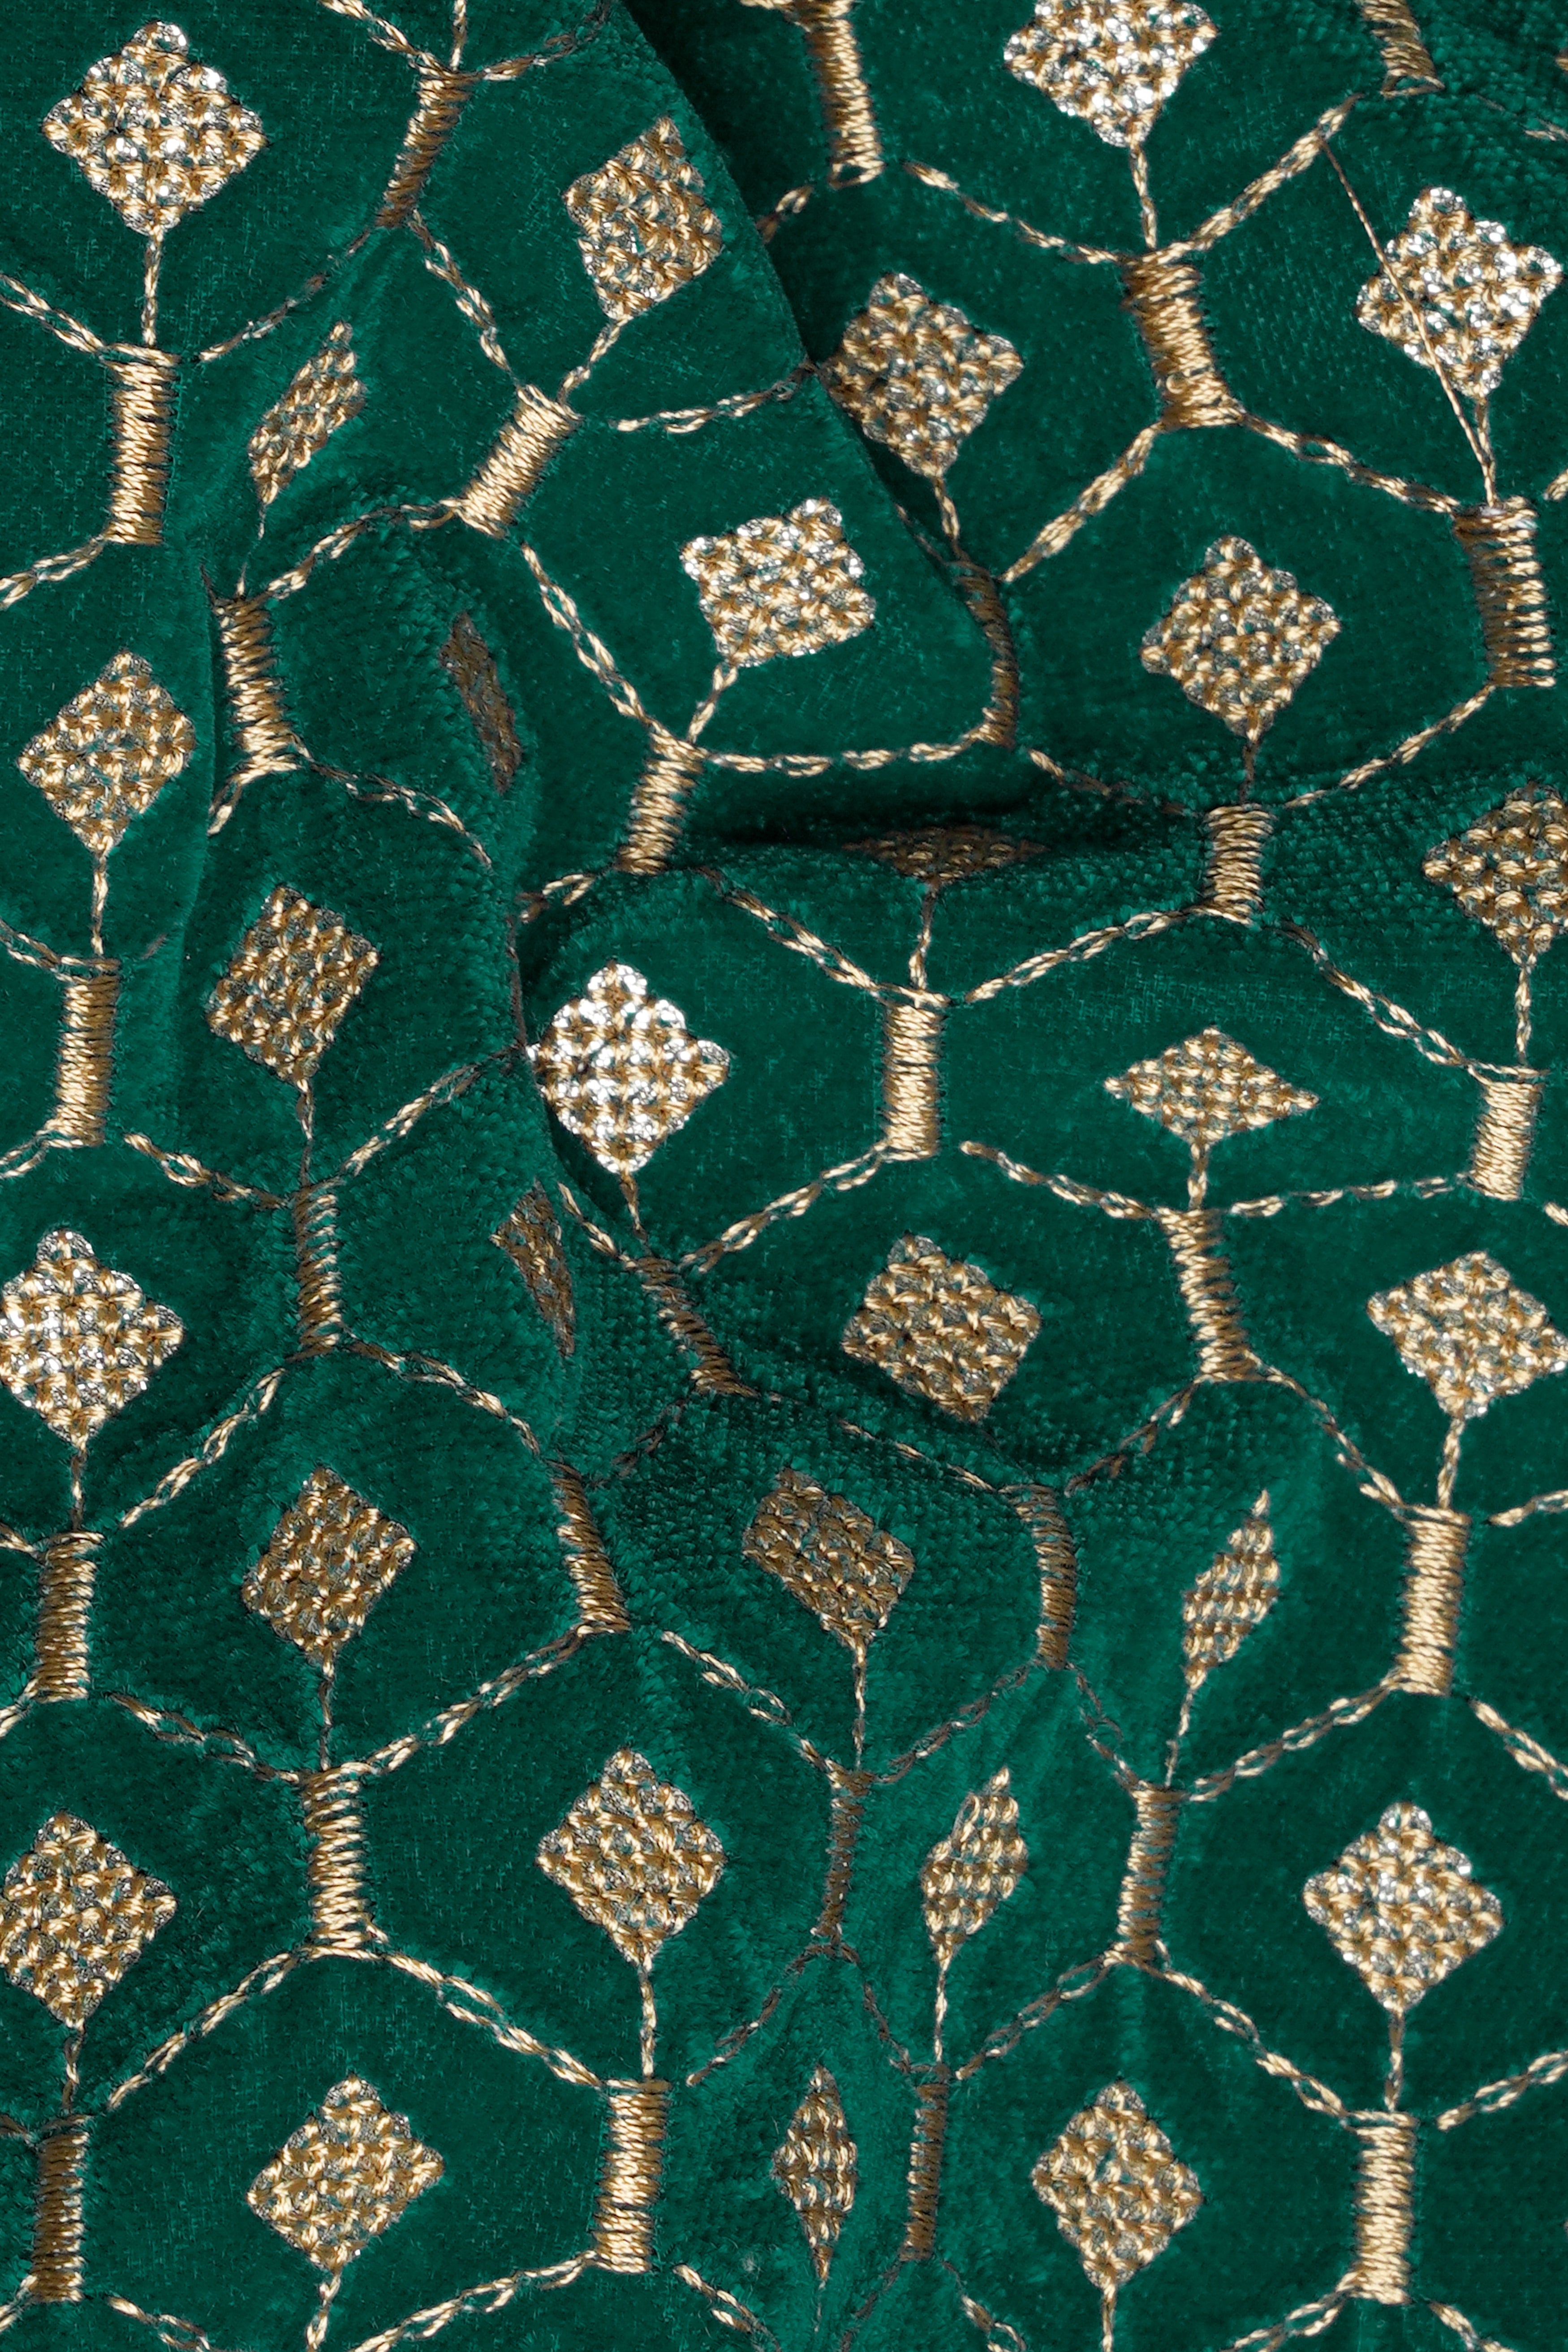 Sherpa Green and Givry Cream Hexagon Thread and Sequin Embroidered Cross Buttoned Bandhgala Jodhpuri BL3519-CBG-36, BL3519-CBG-38, BL3519-CBG-40, BL3519-CBG-42, BL3519-CBG-44, BL3519-CBG-46, BL3519-CBG-51, BL3519-CBG-50, BL3519-CBG-52, BL3519-CBG-54, BL3519-CBG-56, BL3519-CBG-58, BL3519-CBG-60